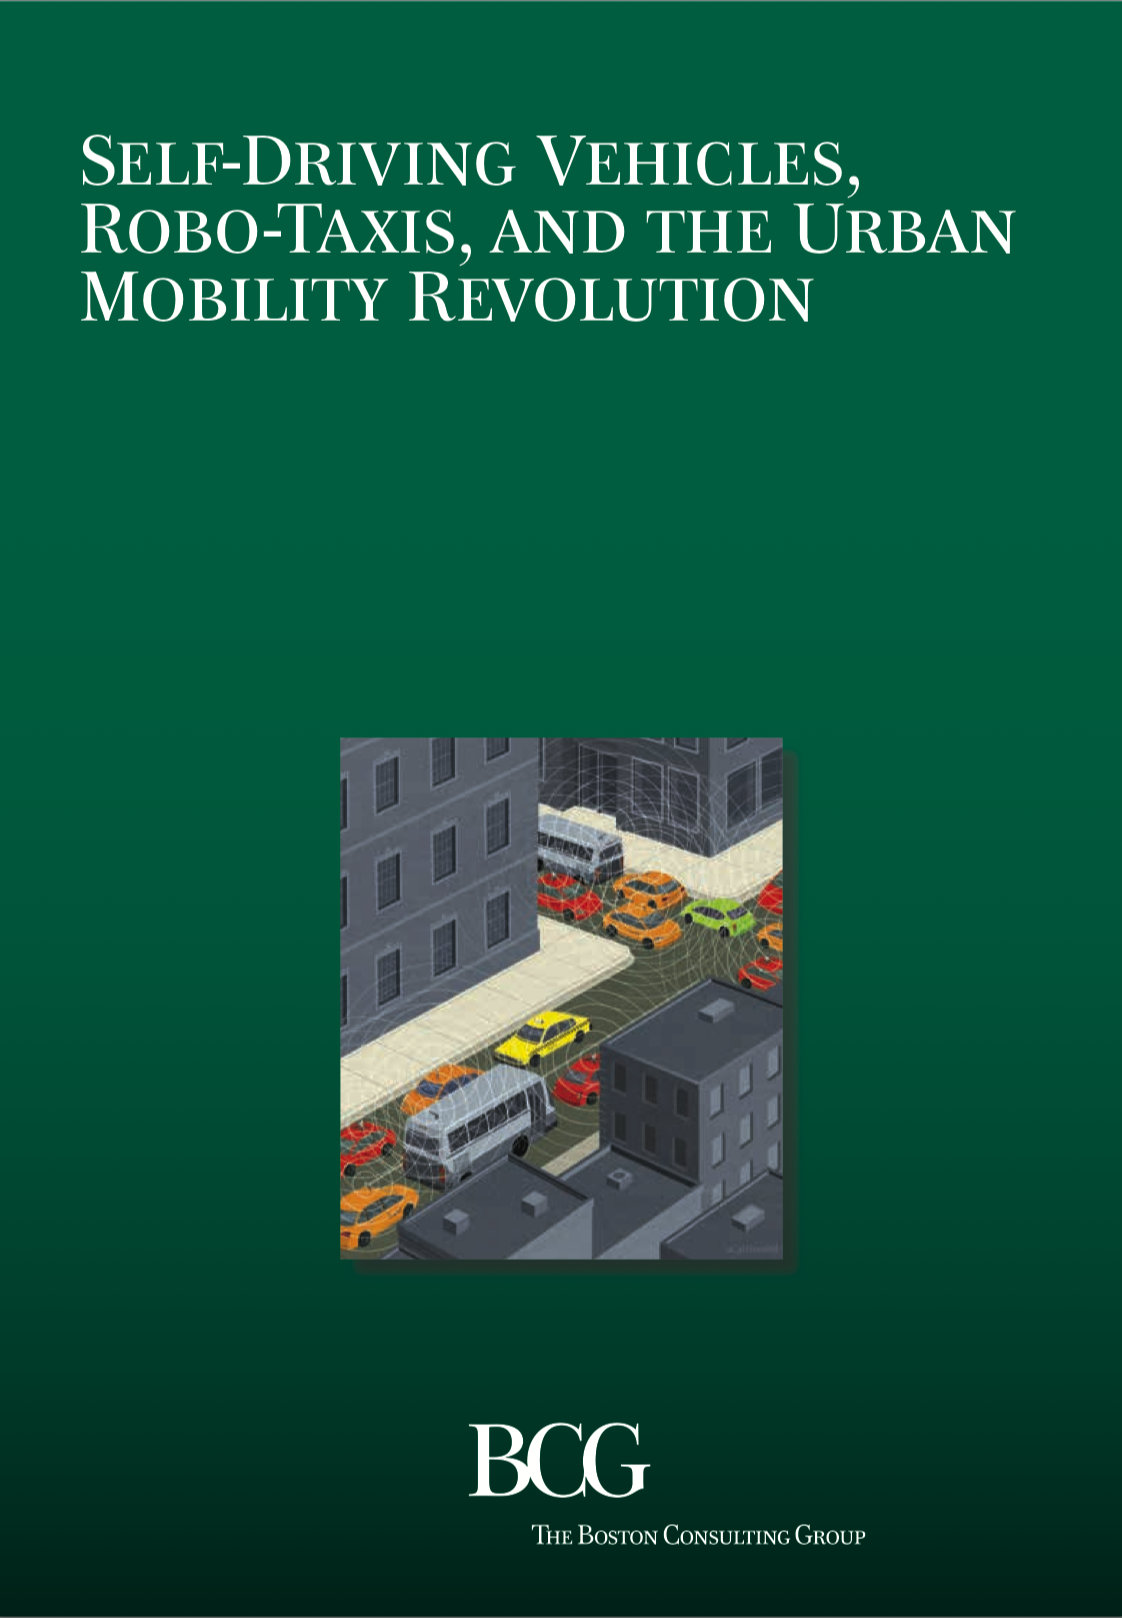 Self-Driving Vehicles, Robo-Taxis, and the Urban Mobility Revolution